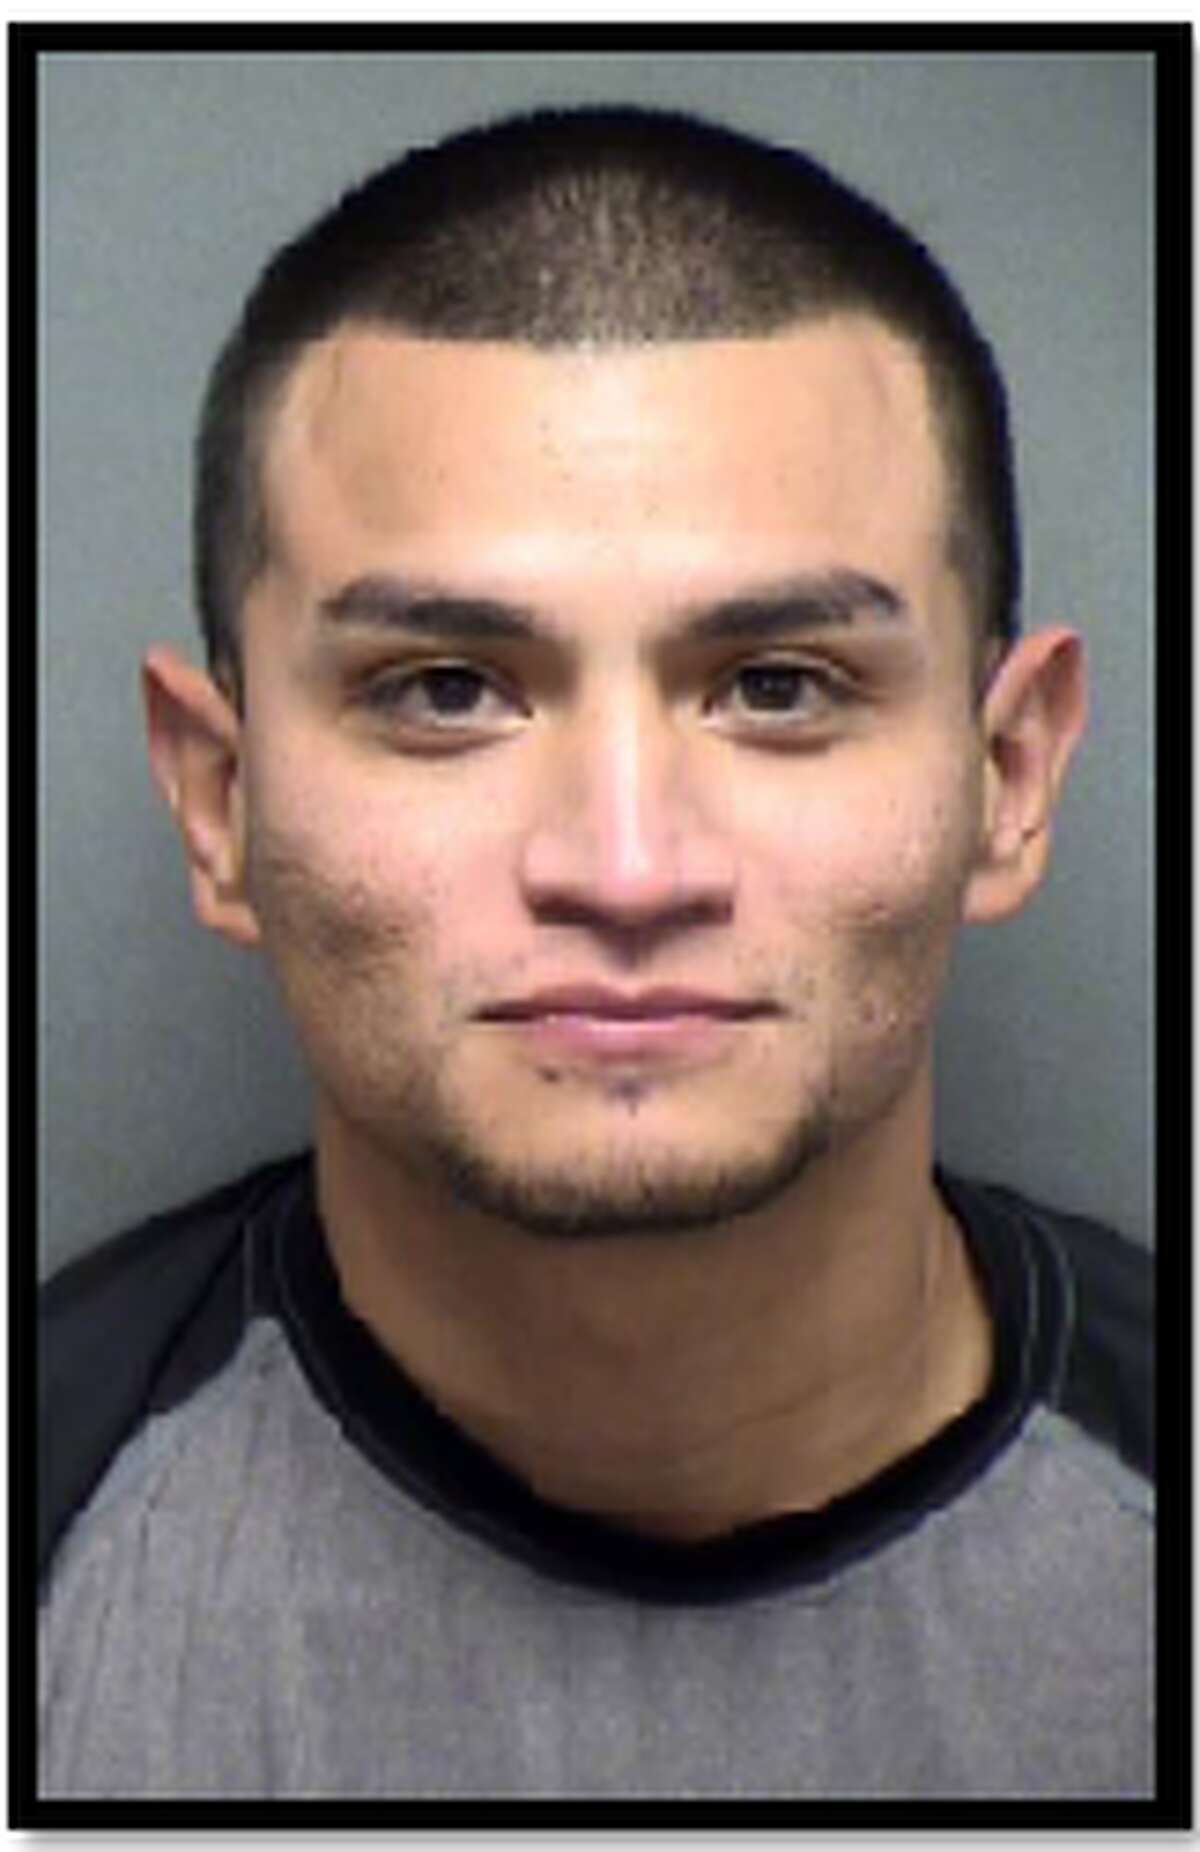 Eric Castillo, 30, is wanted for evading arrest and impersonating a public servant.